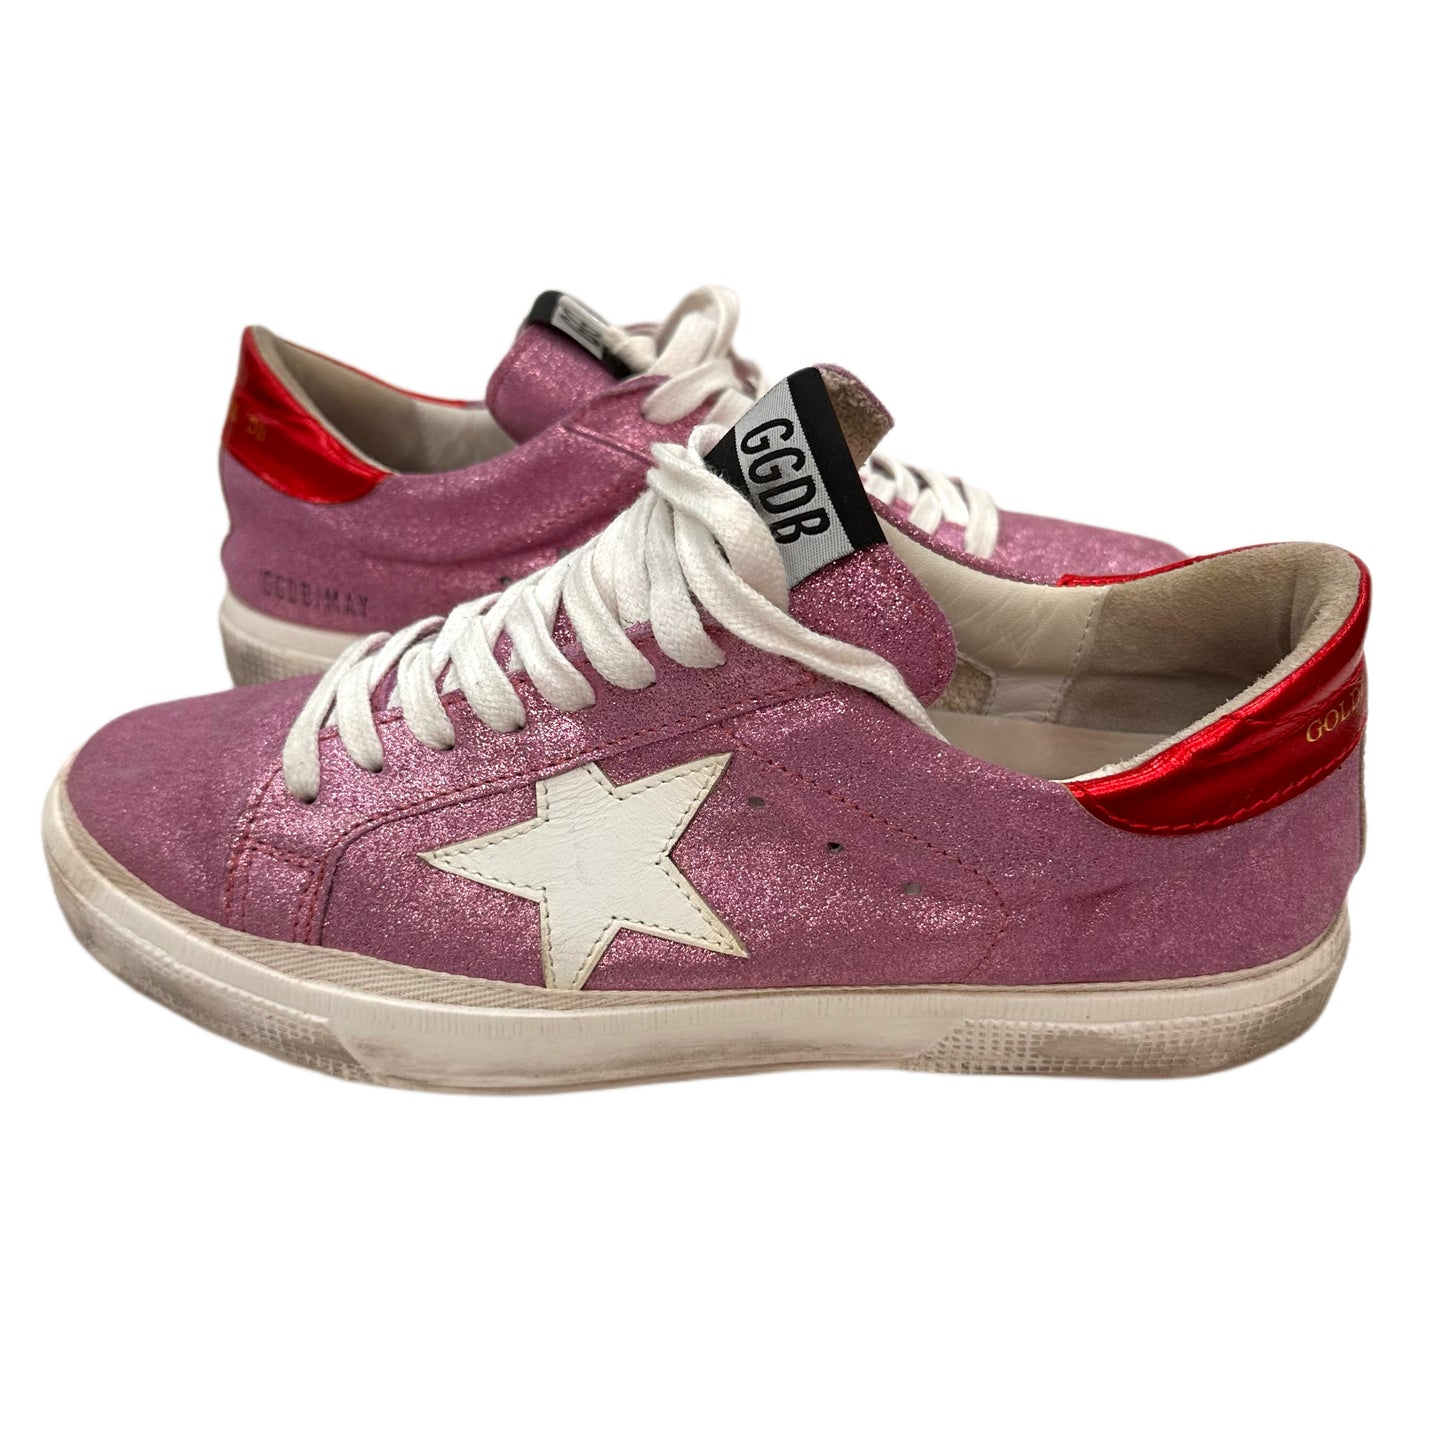 GOLDEN GOOSE Pink Glitter Leather Size 39